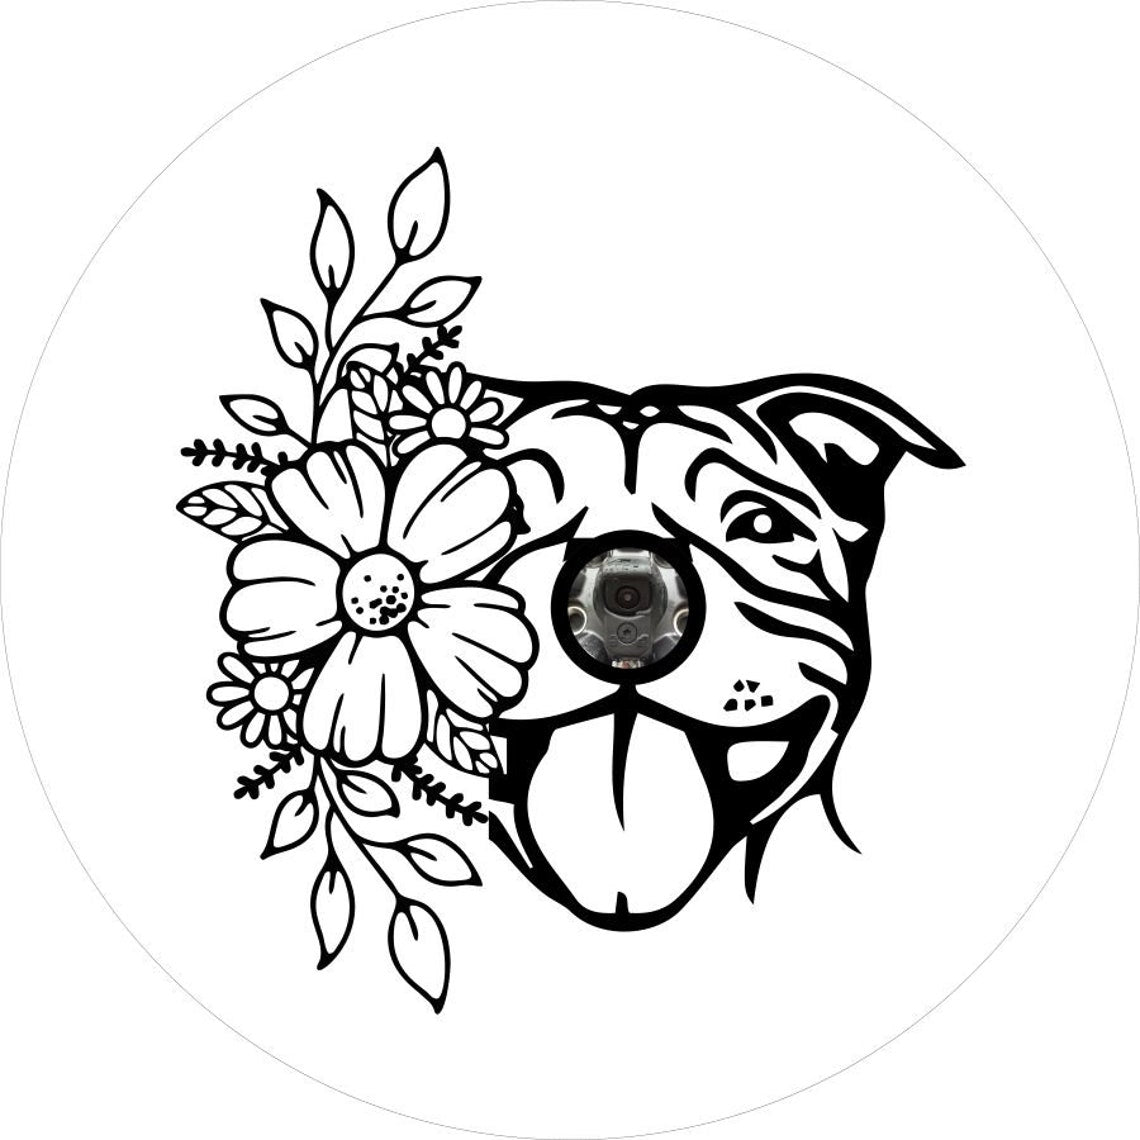 Flowers & Pit Bull Spare Tire Cover Design for Jeep, Bronco, Campers, RV, Trailers, & More